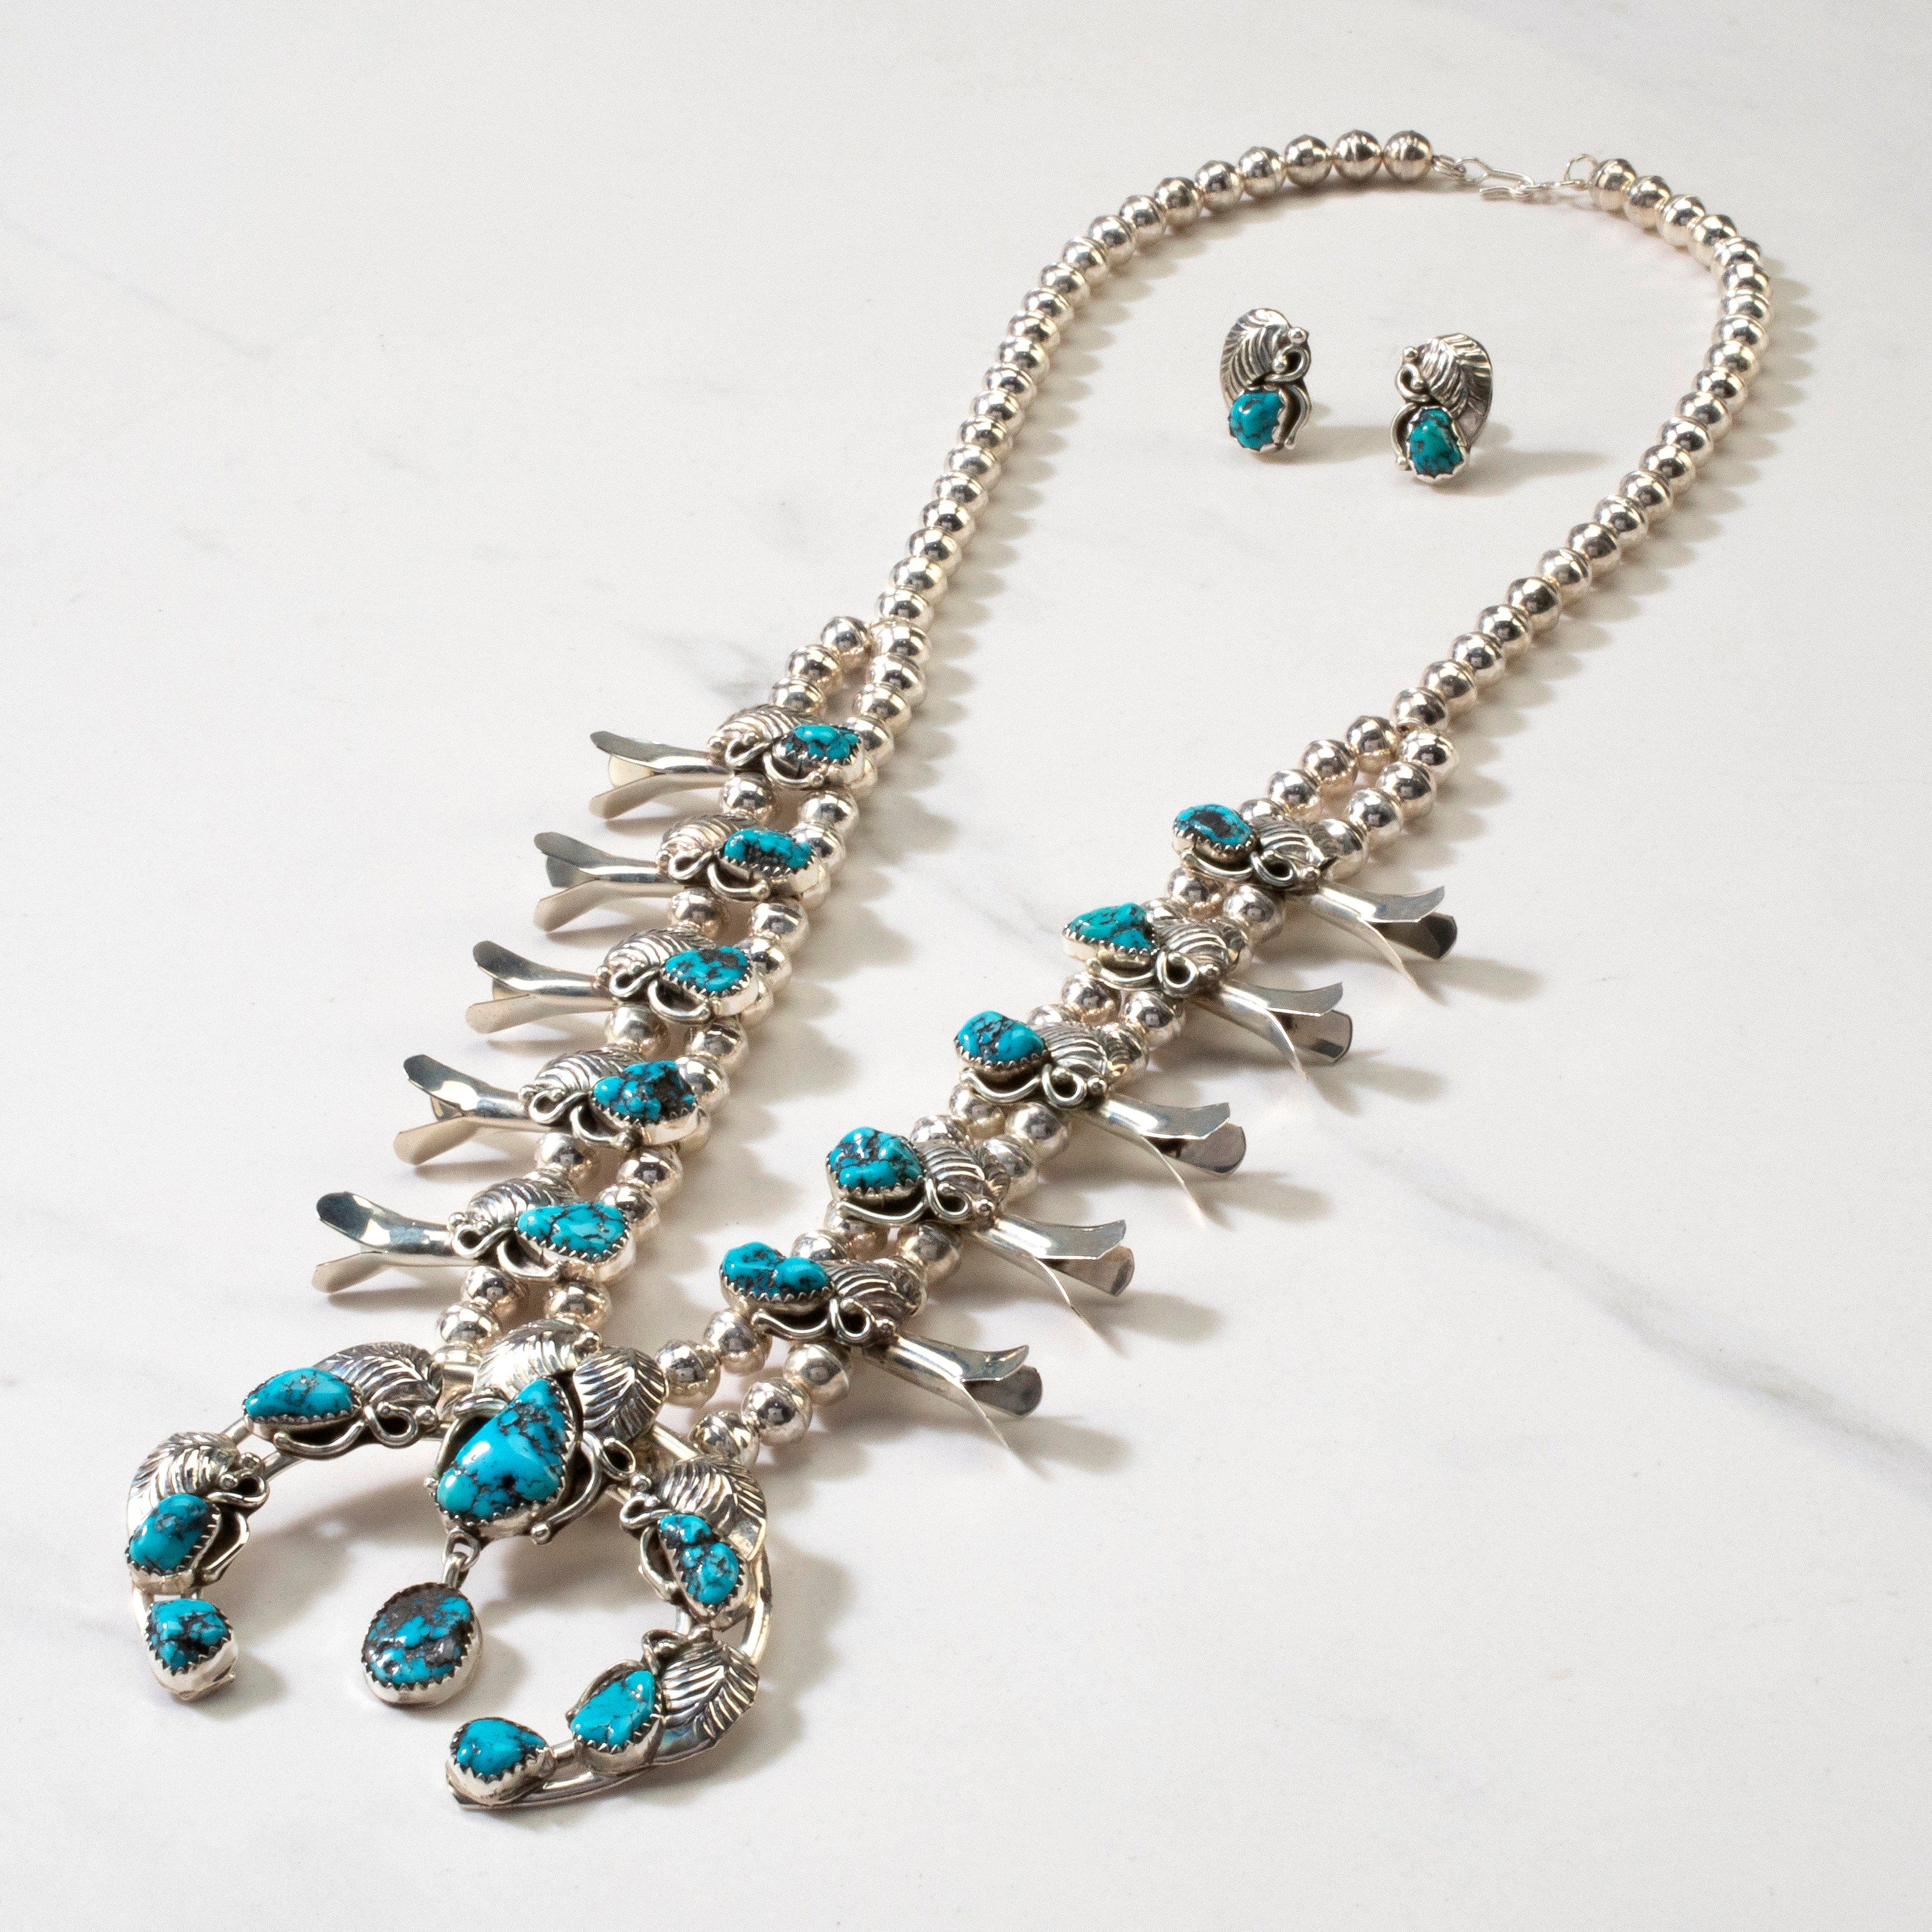 Kalifano Native American Jewelry 21" Navajo Sleeping Beauty Turquoise Squash Blosssom USA Native American Made 925 Sterling Silver Necklace & Stud Earring Set NAN3000.006